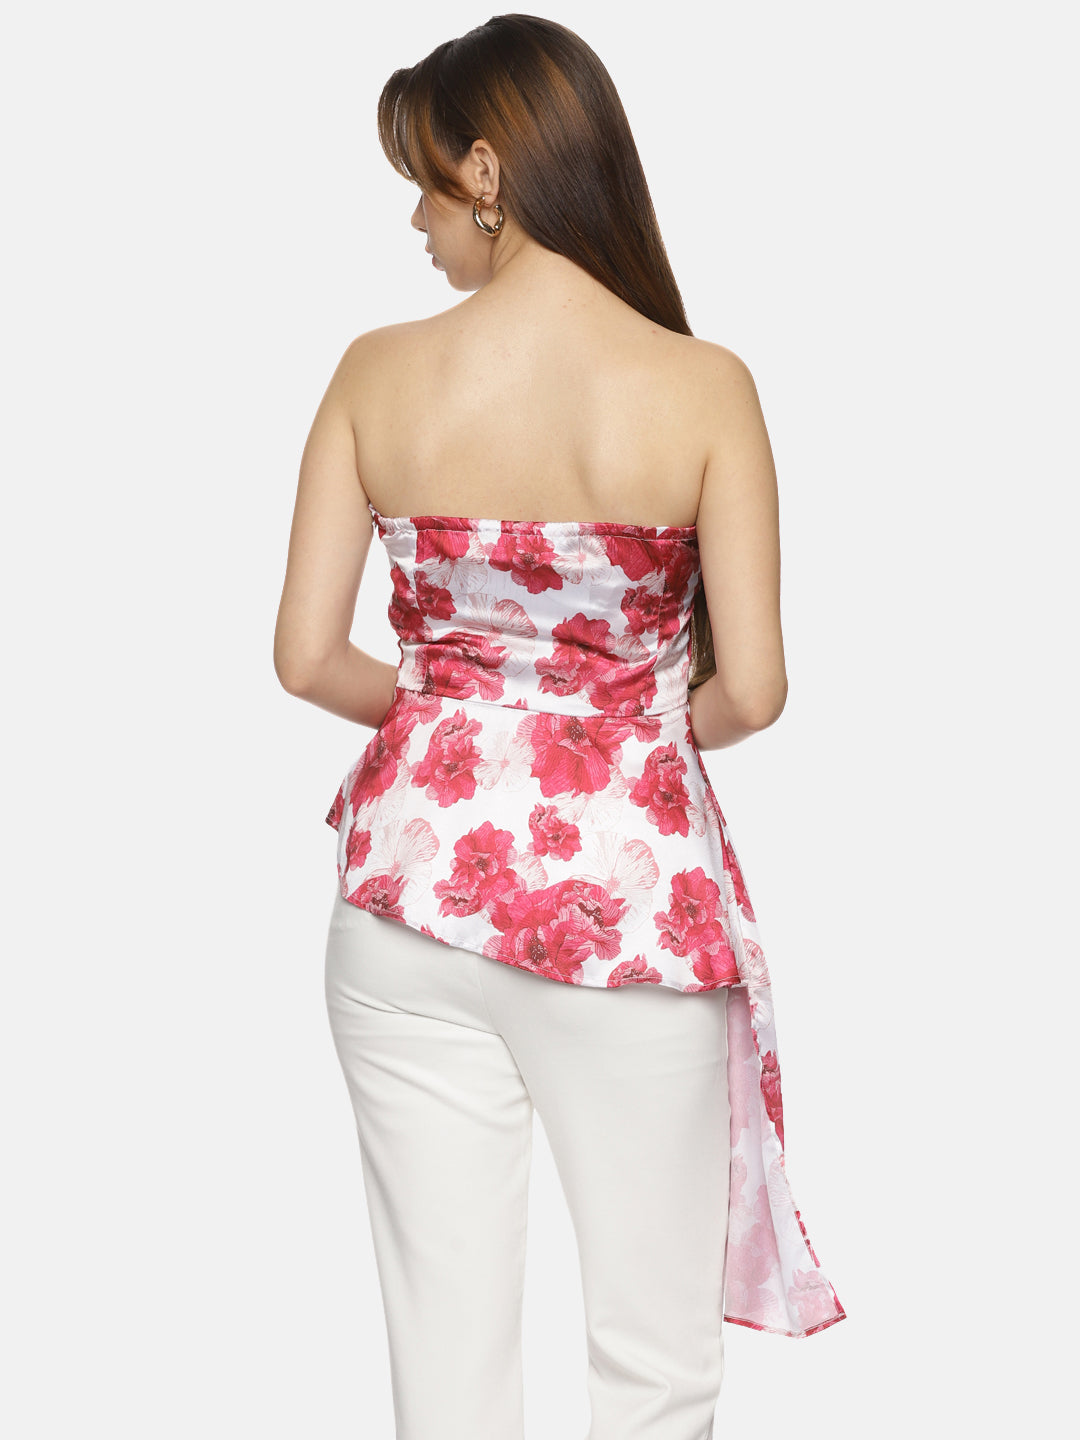 IS.U Floral White Flared Bandeau Top